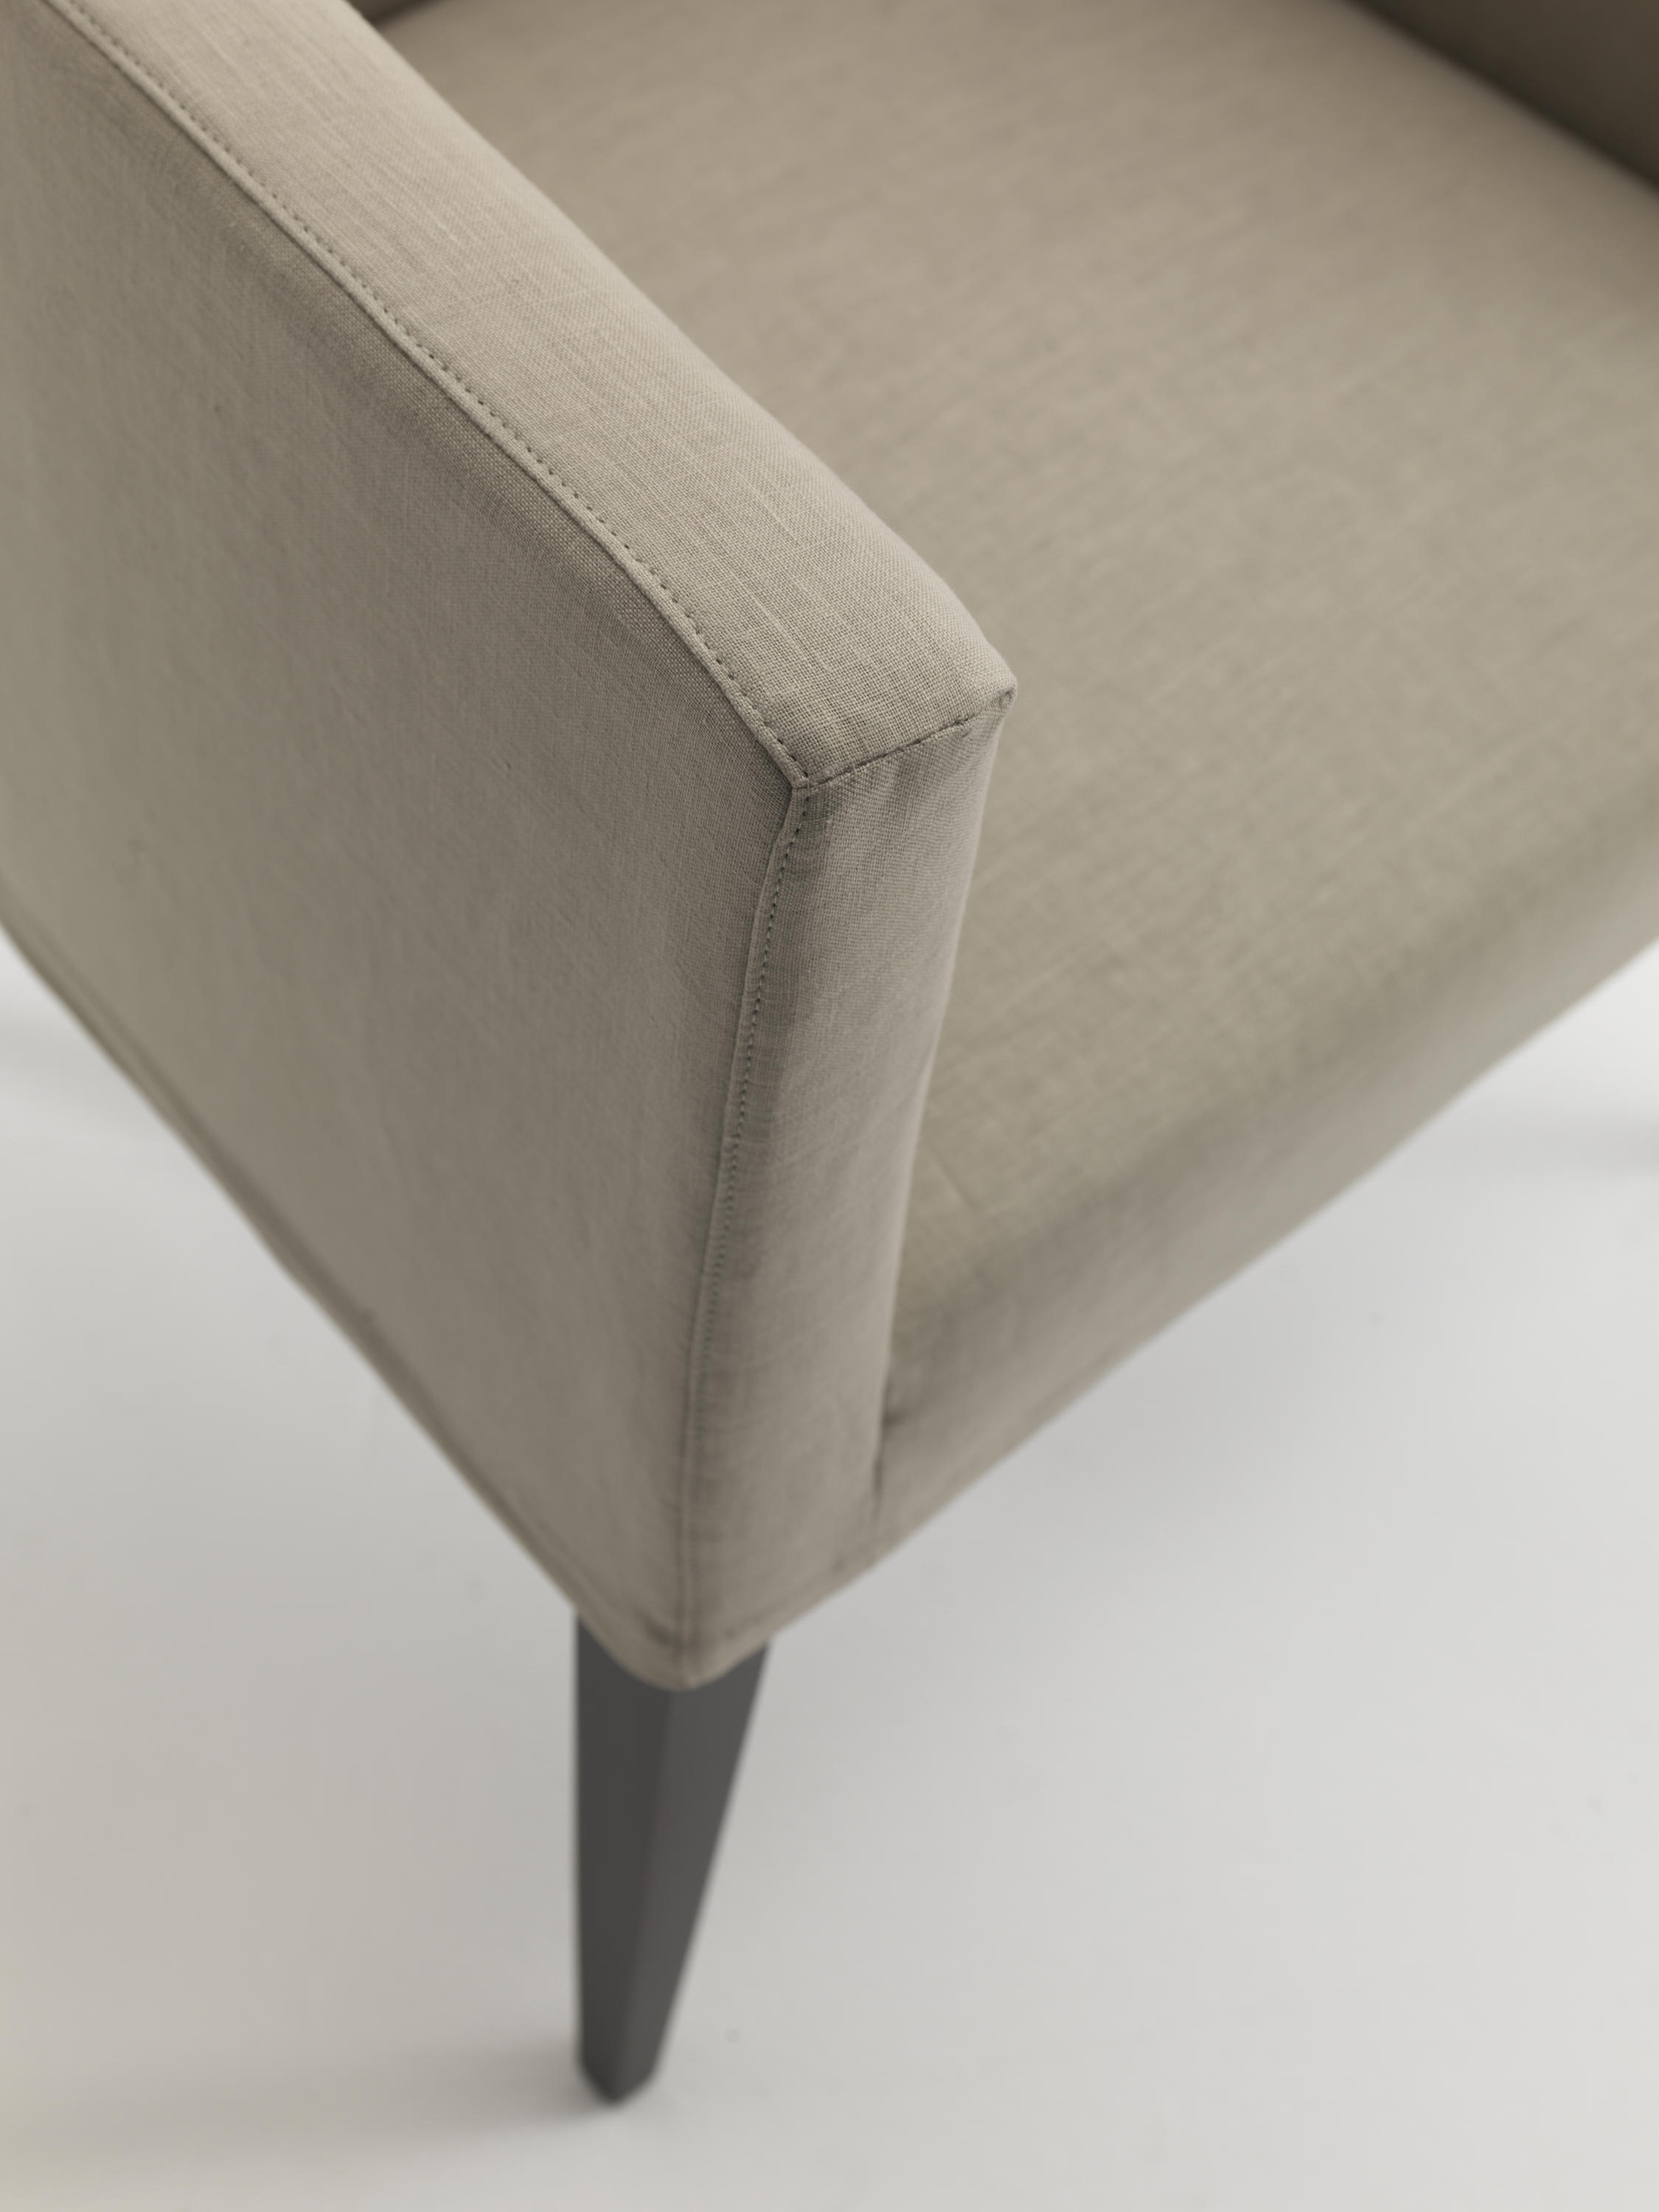 ADELE - Chairs from Frigerio | Architonic